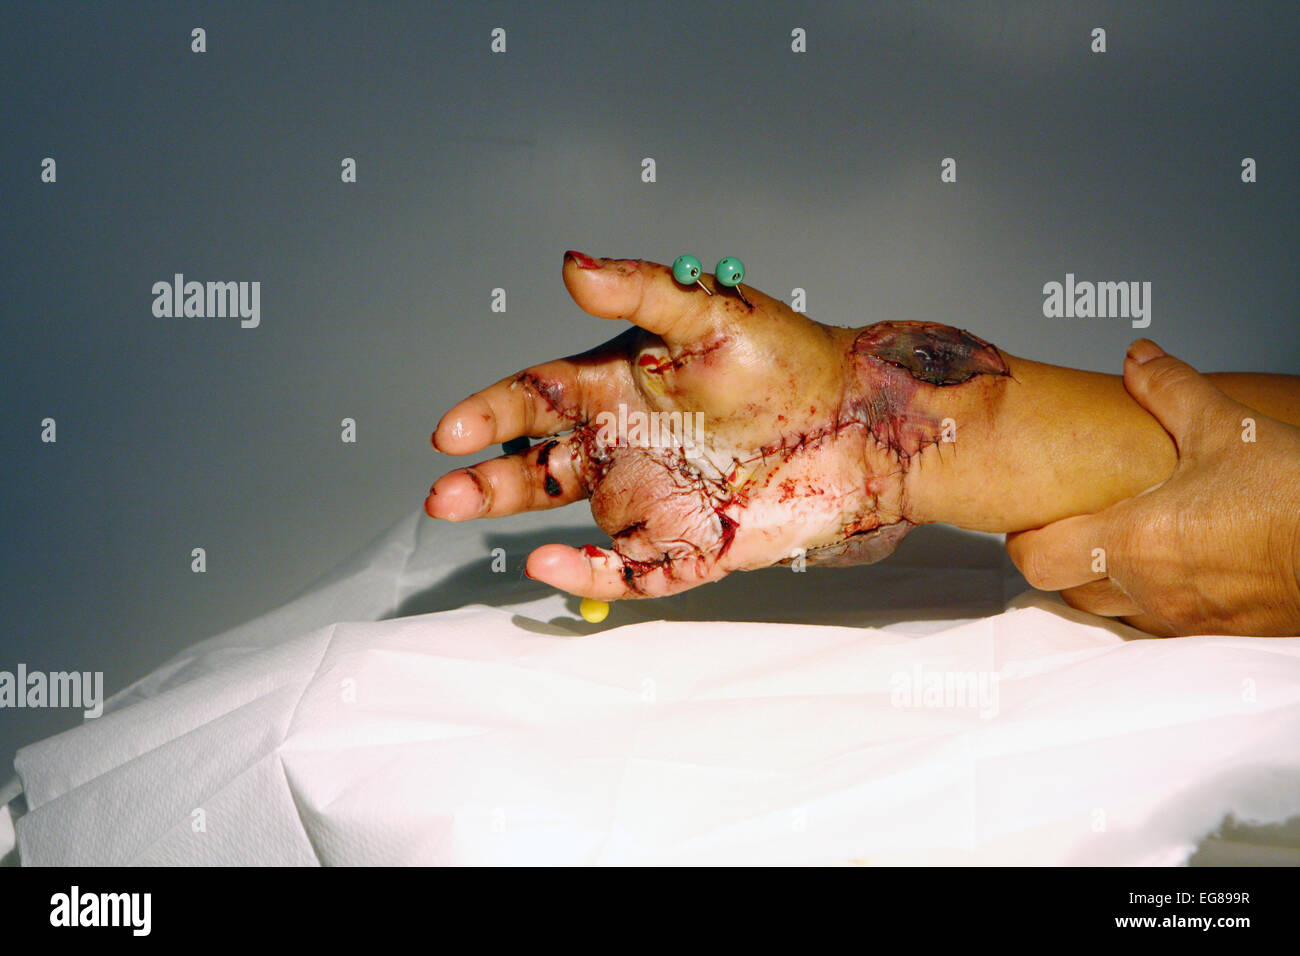 A severely injured hand 7 days after completion of a 15 hour operation. Stock Photo